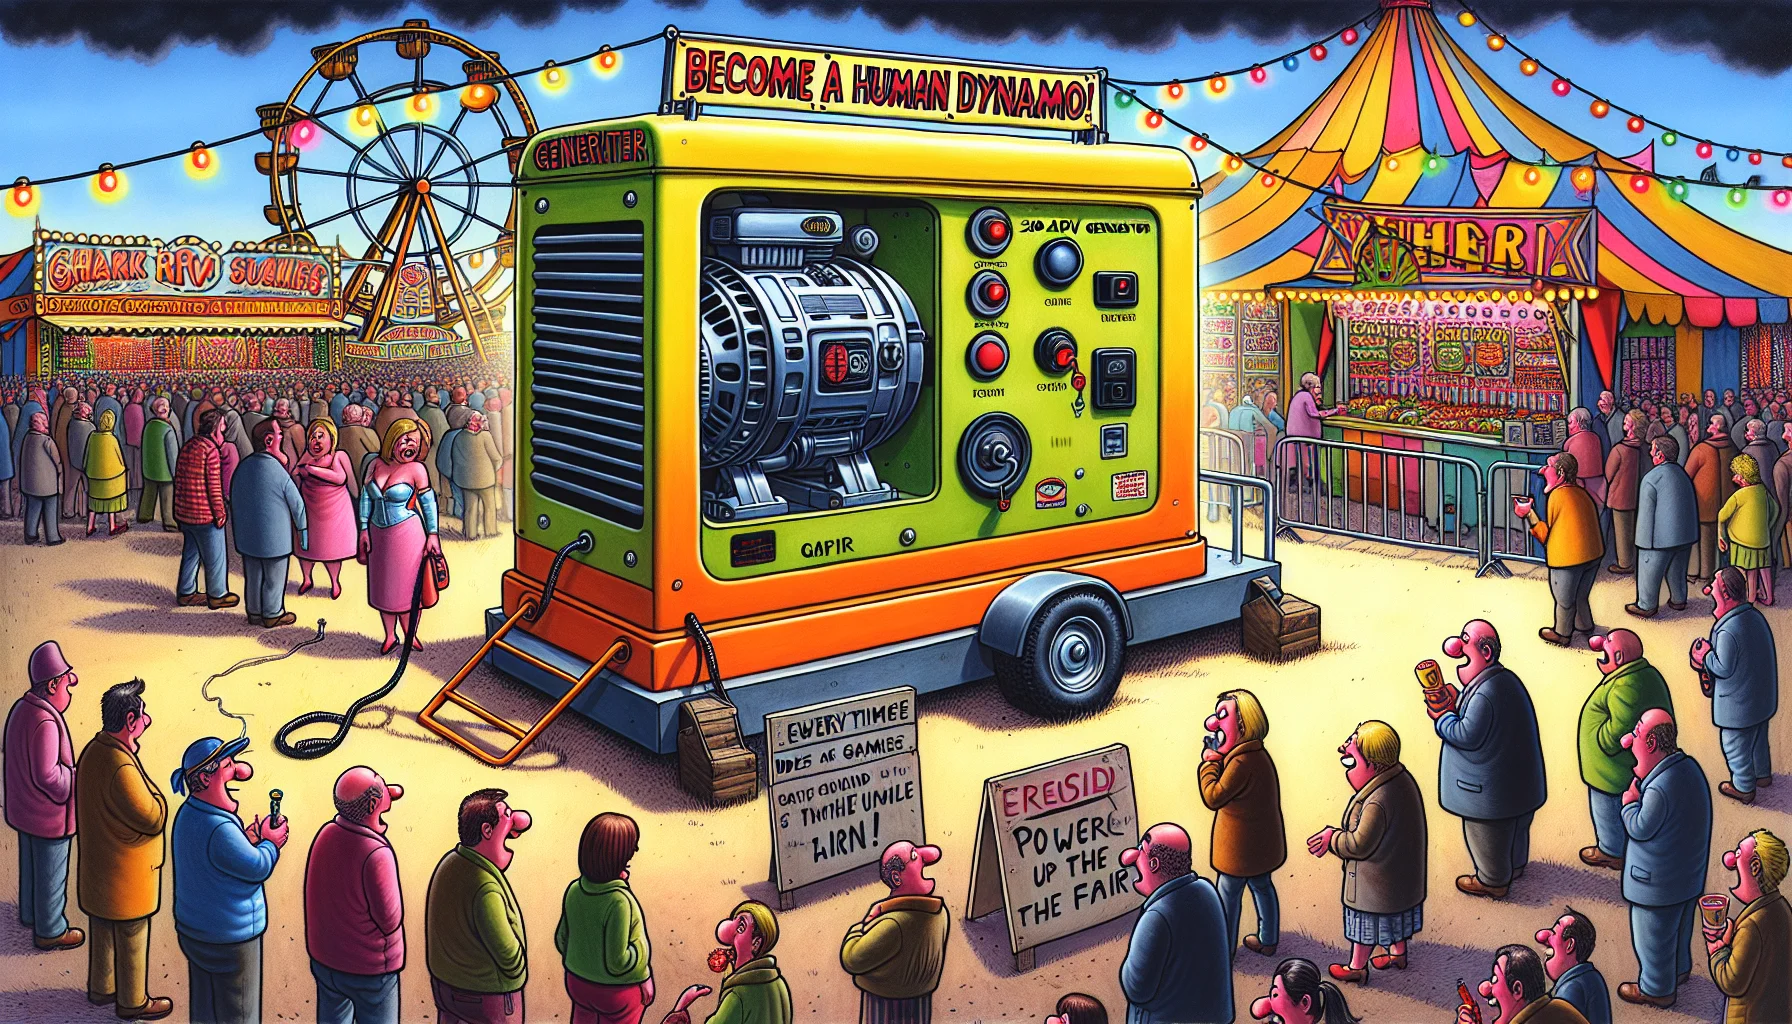 Picture a fairground scene where a 30 amp RV generator has unexpectedly become the star of the show. Instead of the usual rides and games, people of all descents and genders, are standing in line, some chuckling, some wide-eyed, eager to turn the generator's lever. The generator, oversized and cartoonish, vibrant in colour, is nestled in the center of the park. Every time it runs, lights strung around the fairground come alive, illuminating the area in a technicolor glow. A sign stands beside it wittily reads 'Become a Human Dynamo! Power up the Fair.'